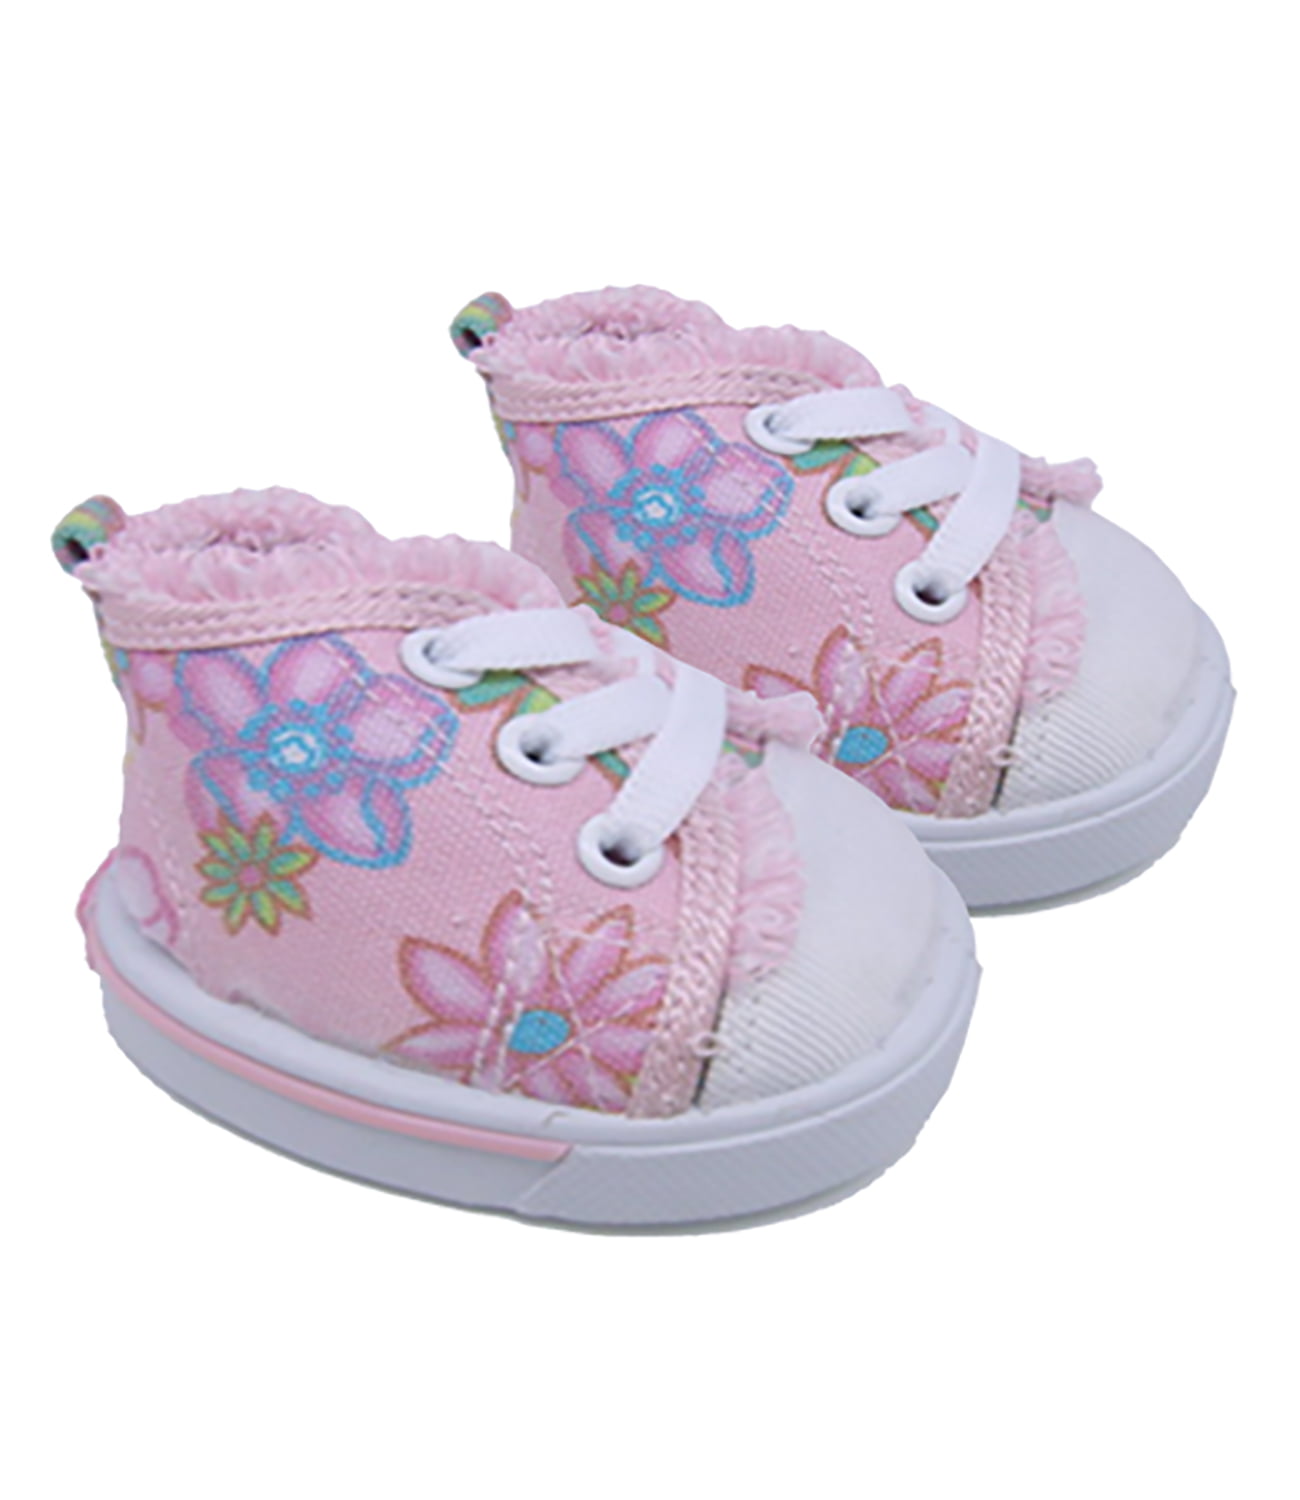 Girl Power Shoes Teddy Bear Clothes Fits Most 14